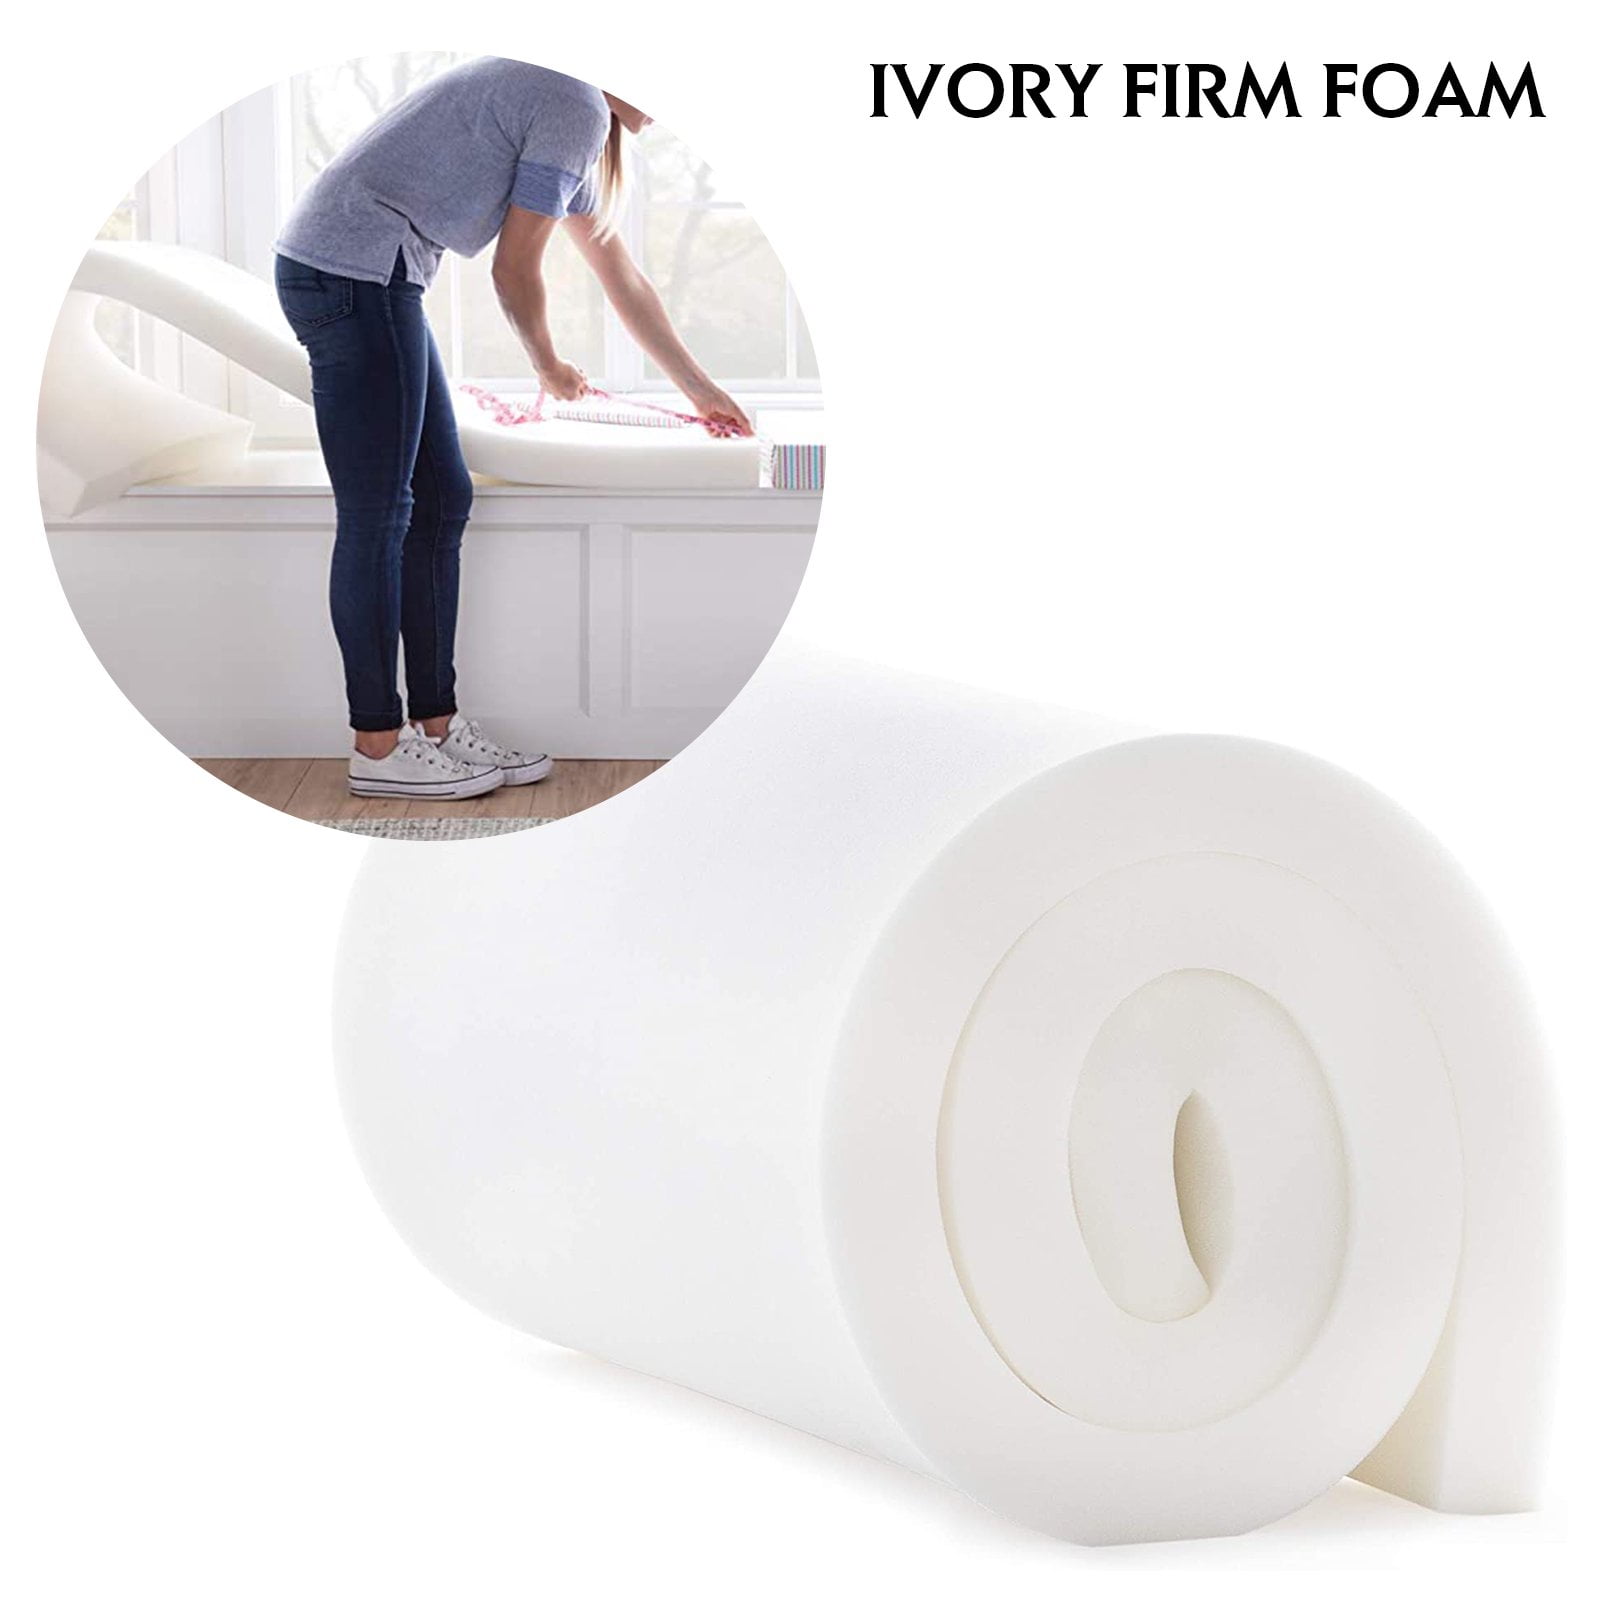 Upholstery Foam By The Yard - Fabric Farms